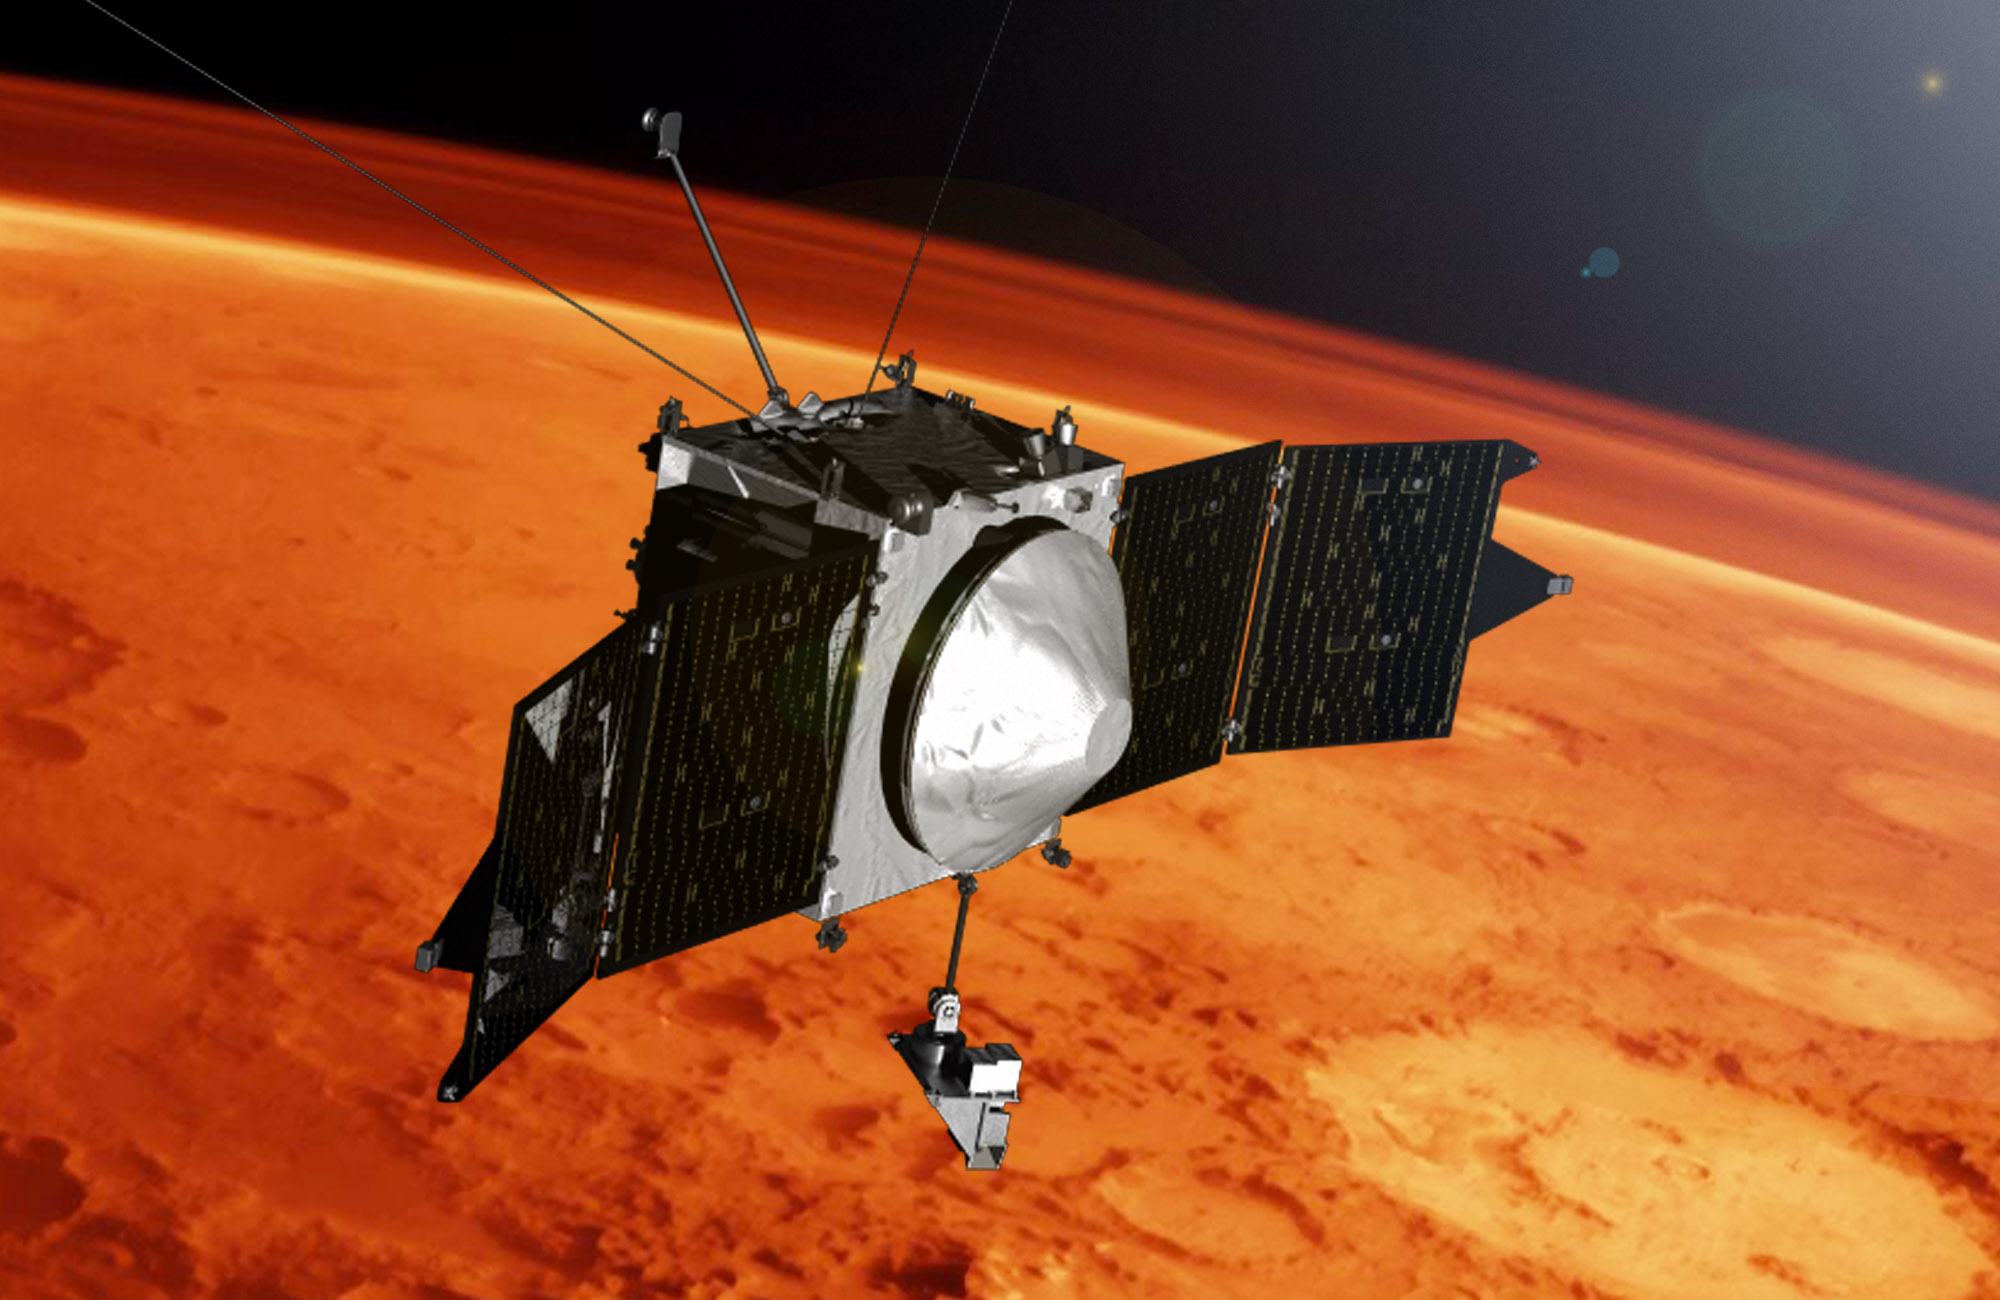 NASA’s MAVEN orbiter is the first mission devoted to observing the tenuous upper atmosphere of Mars to help understand radical climate change on the planet. Credit: NASA Goddard Space Flight Center